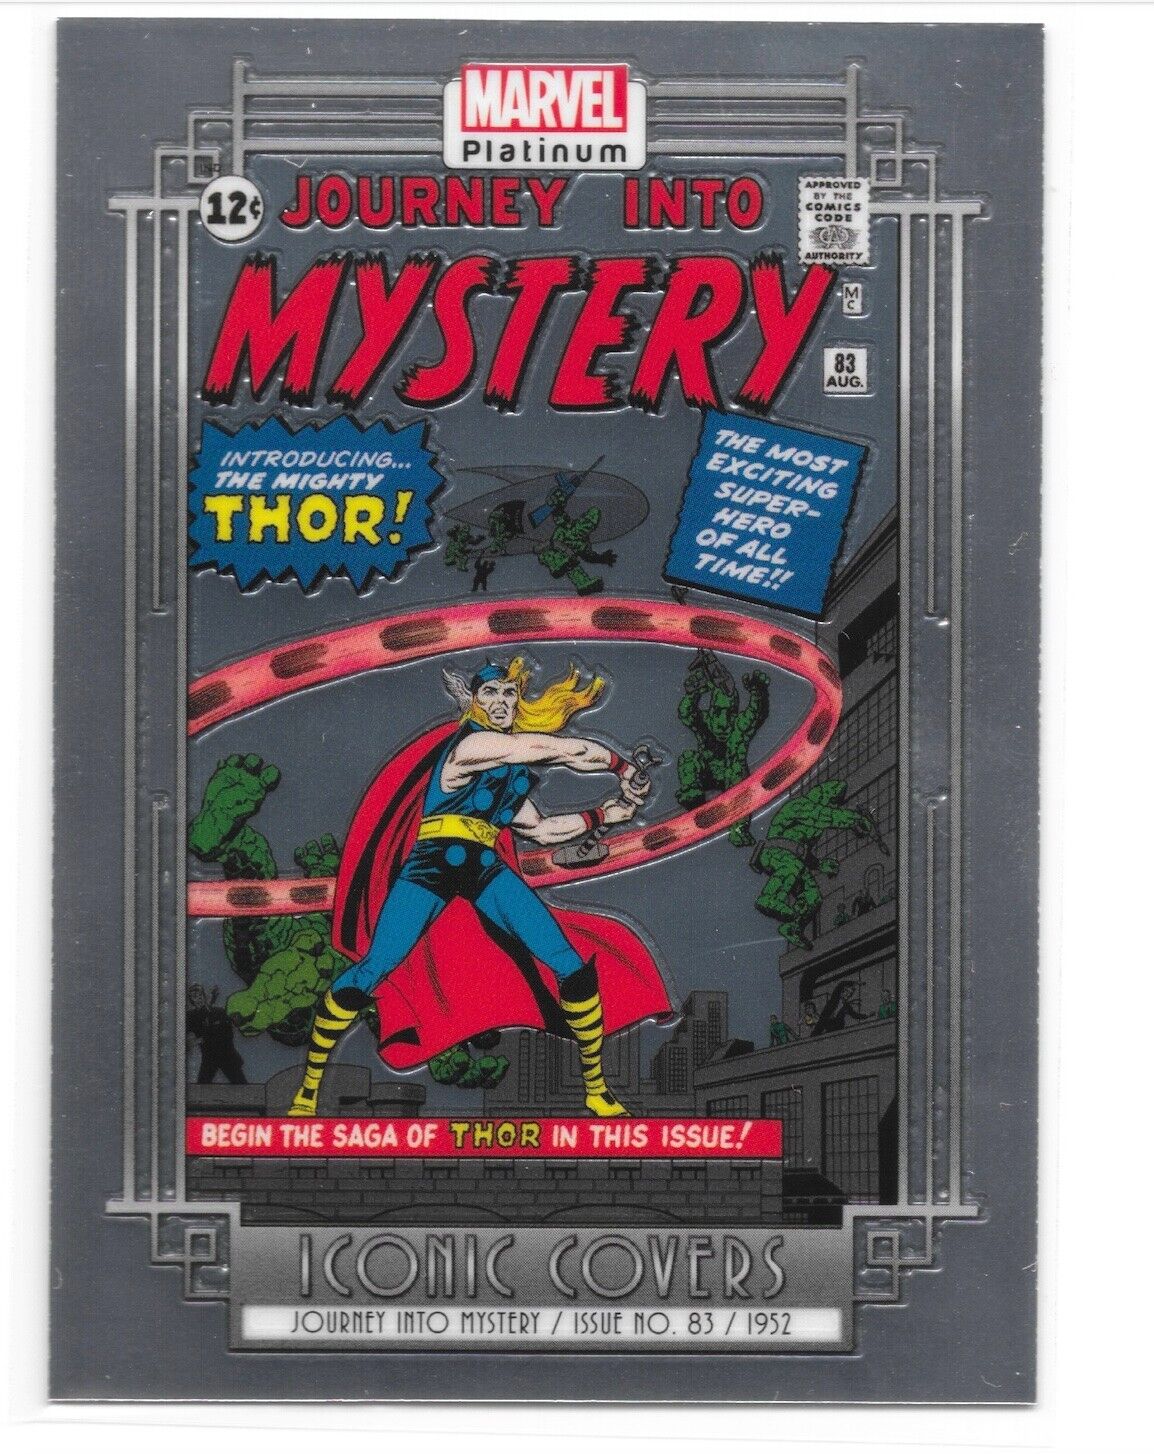 2023 Upper Deck Marvel Platinum Iconic Covers ICO4 Journey Into Mystery